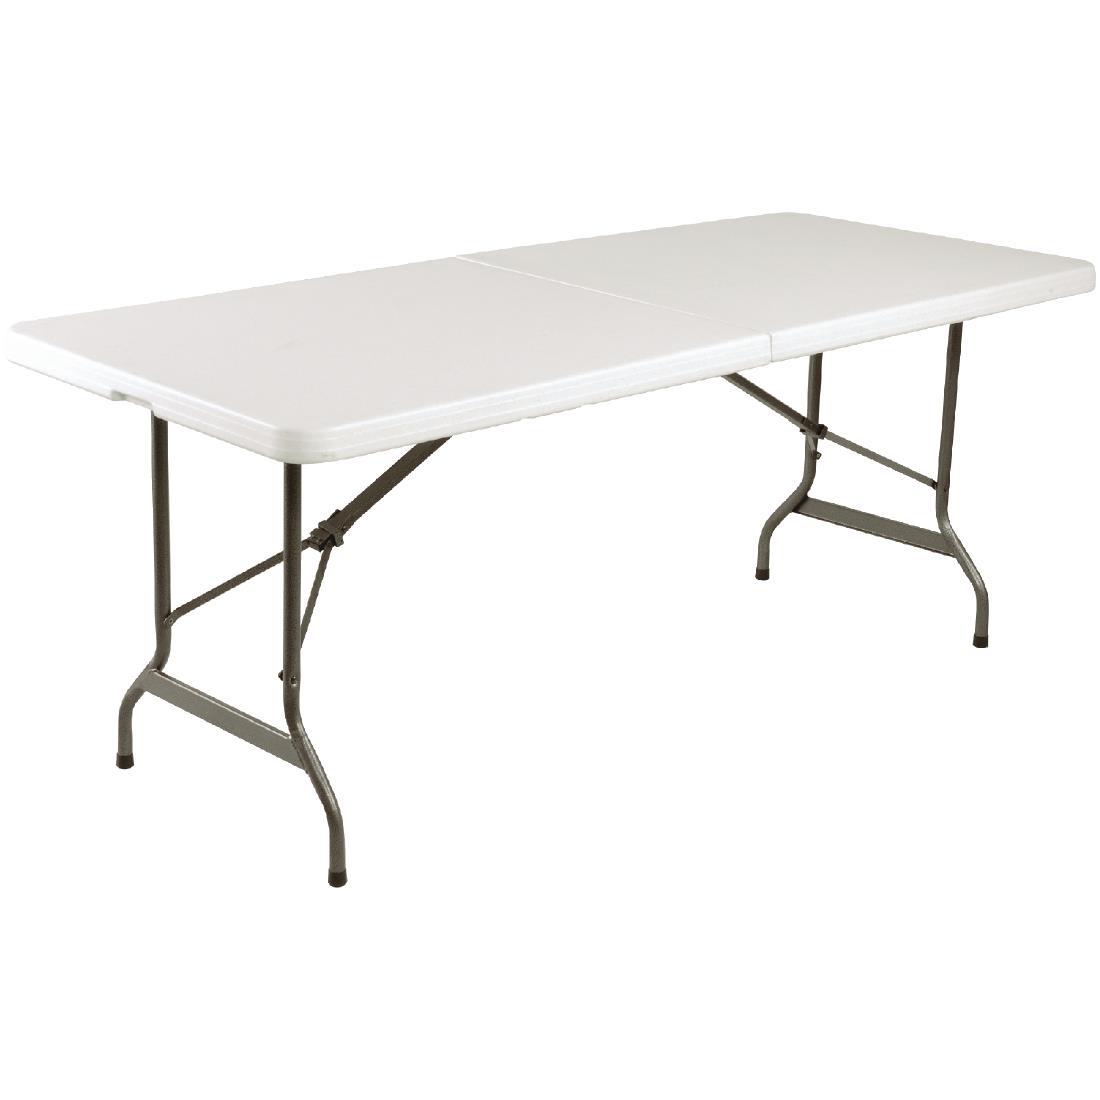 Special Offer Bolero PE Centre Folding Table 6ft with Two Folding Benches - SA425  - 5